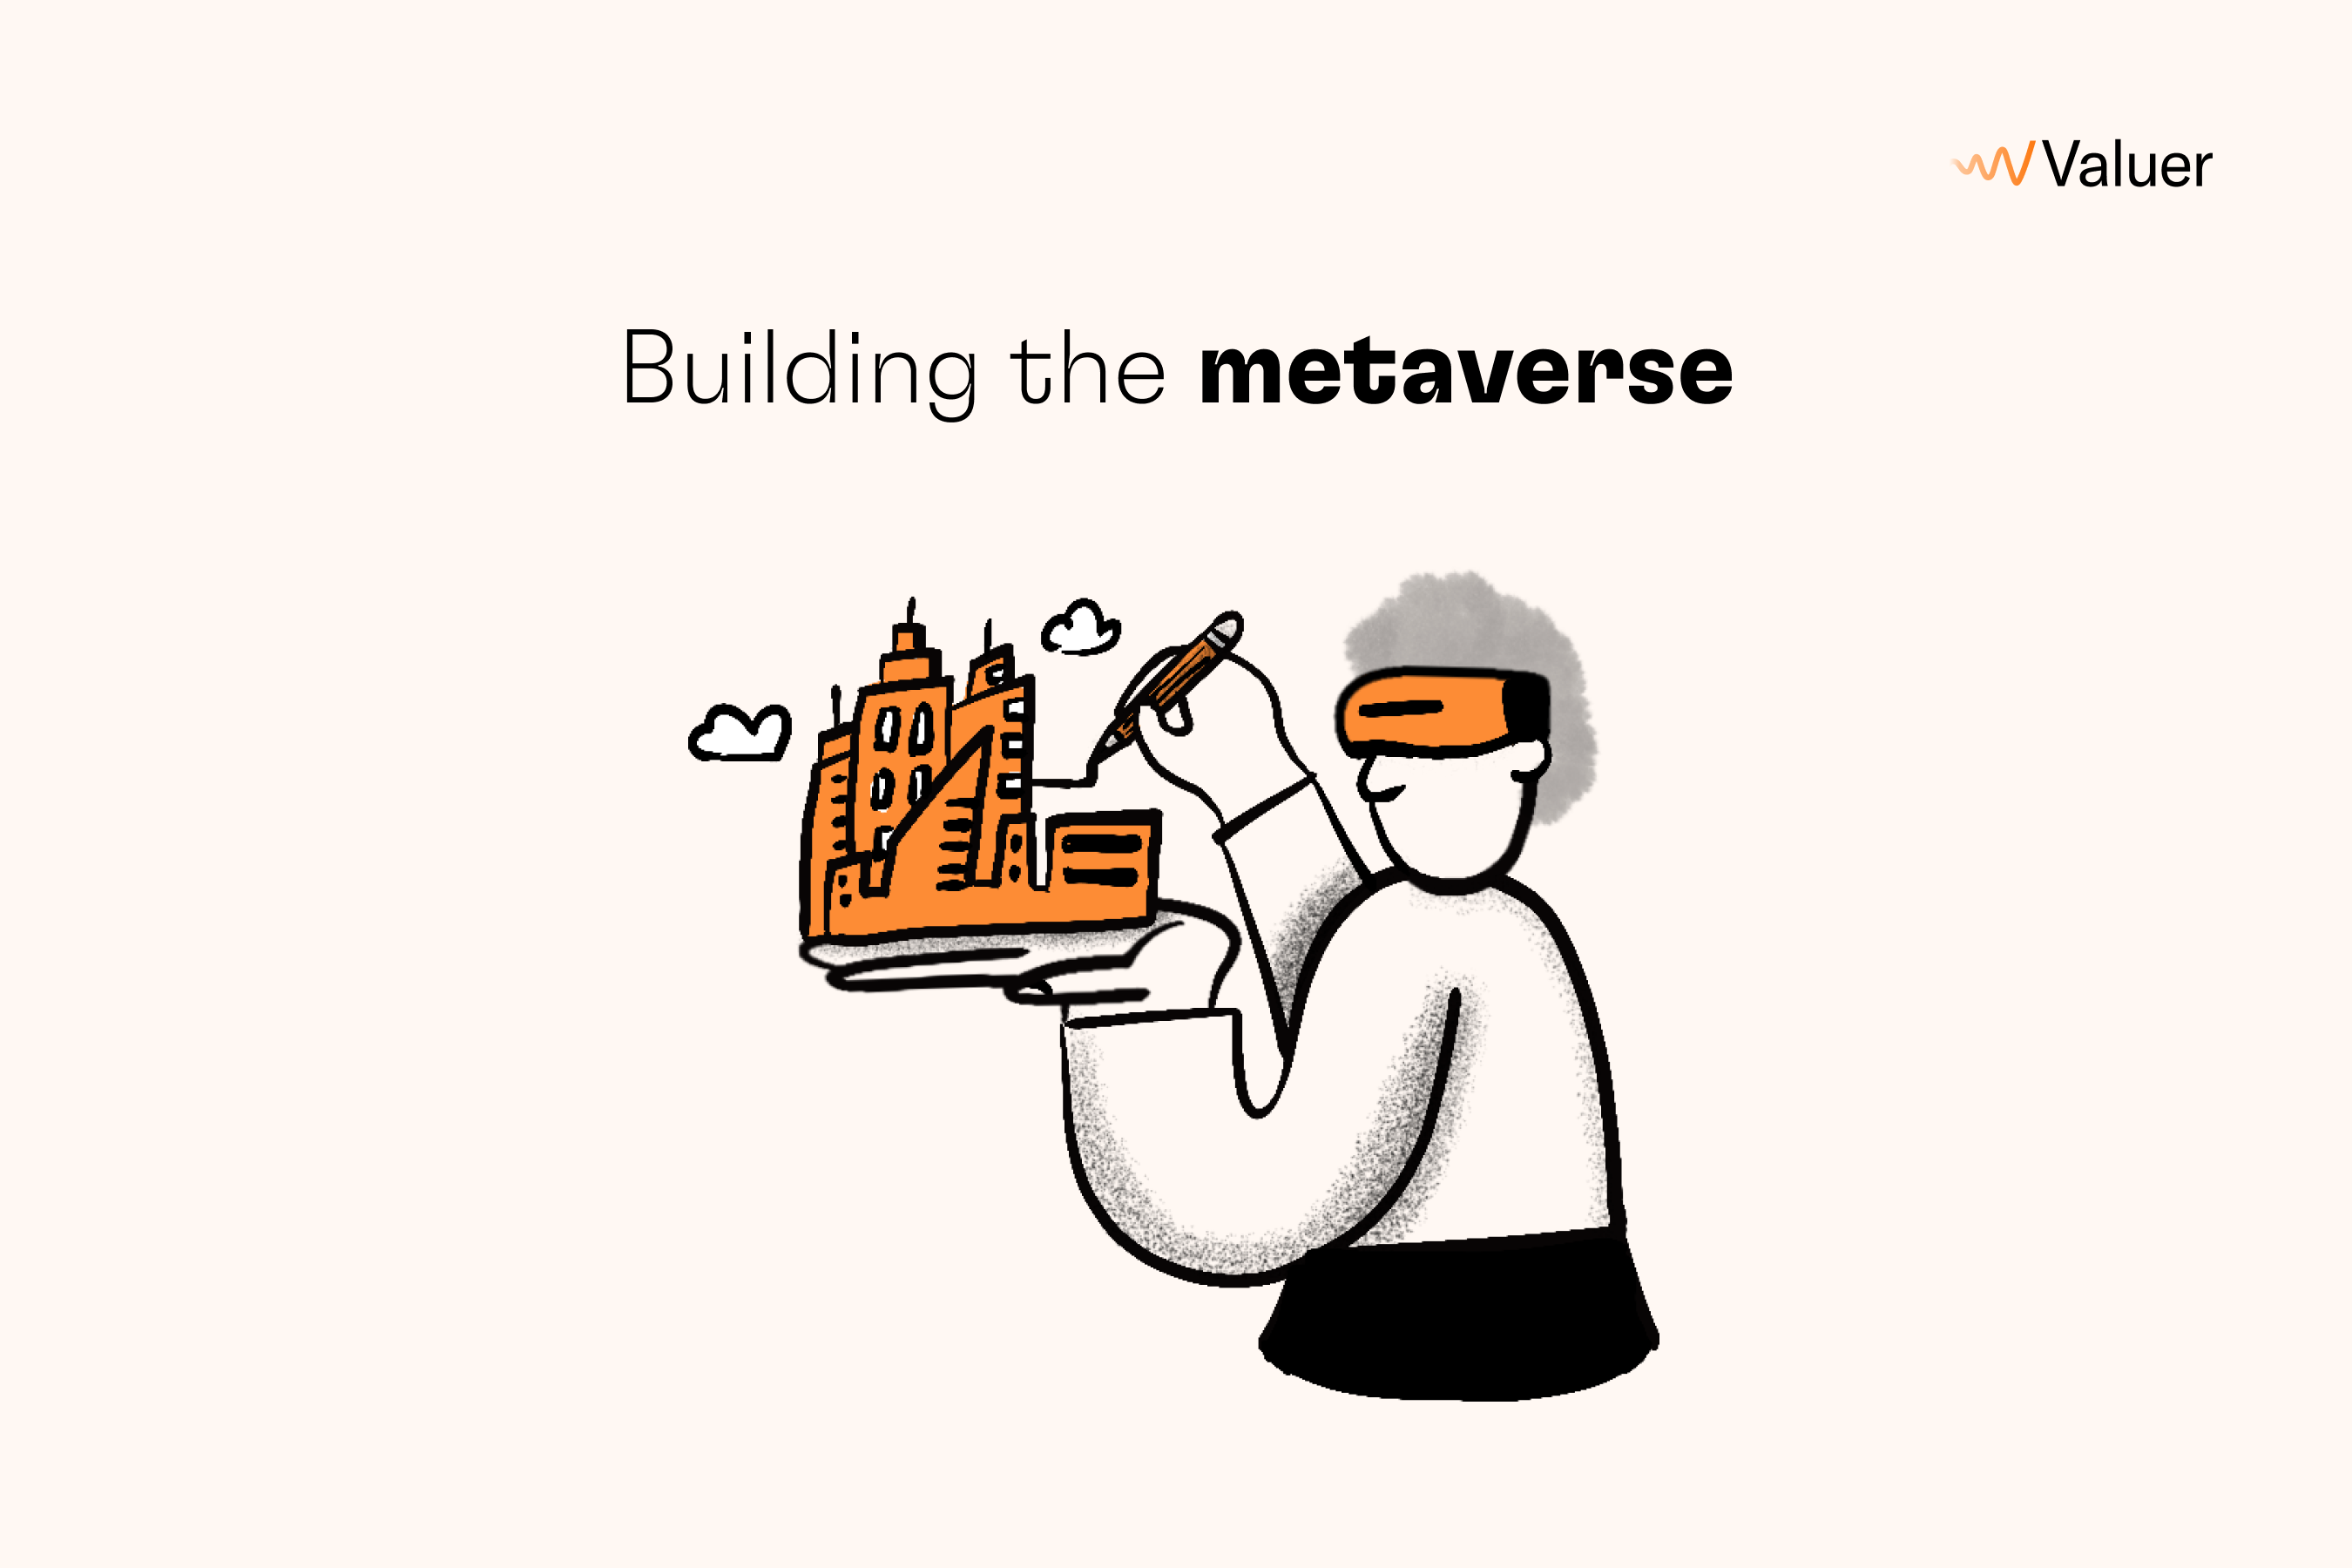 Building the metaverse